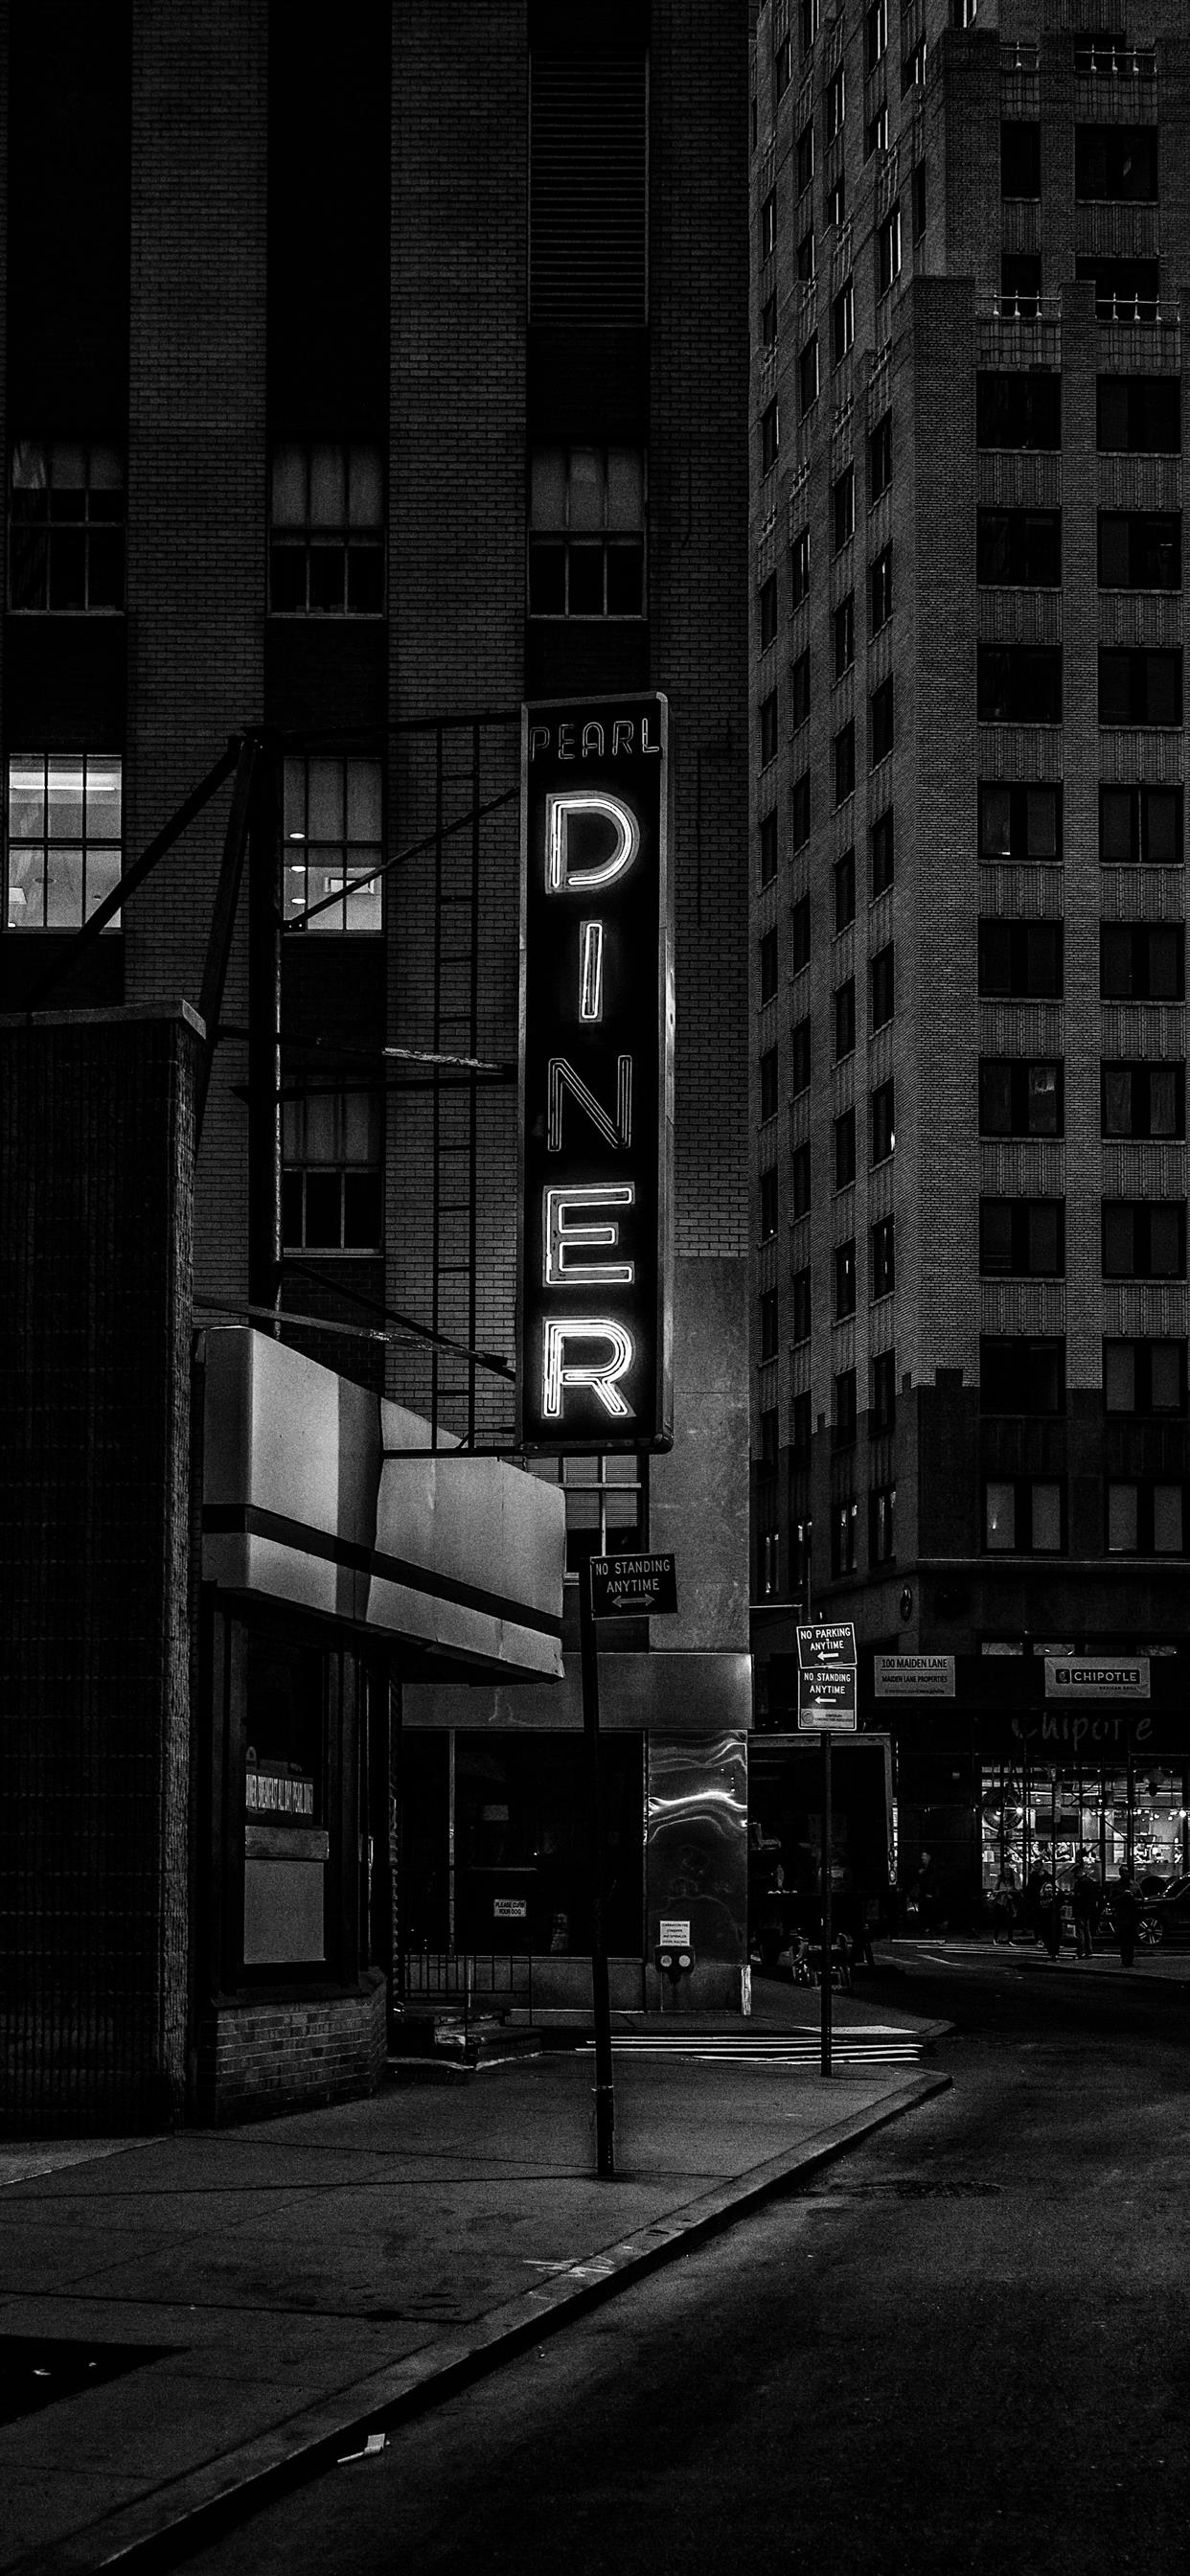 diner sign financial district iPhone X Wallpaper Free Download